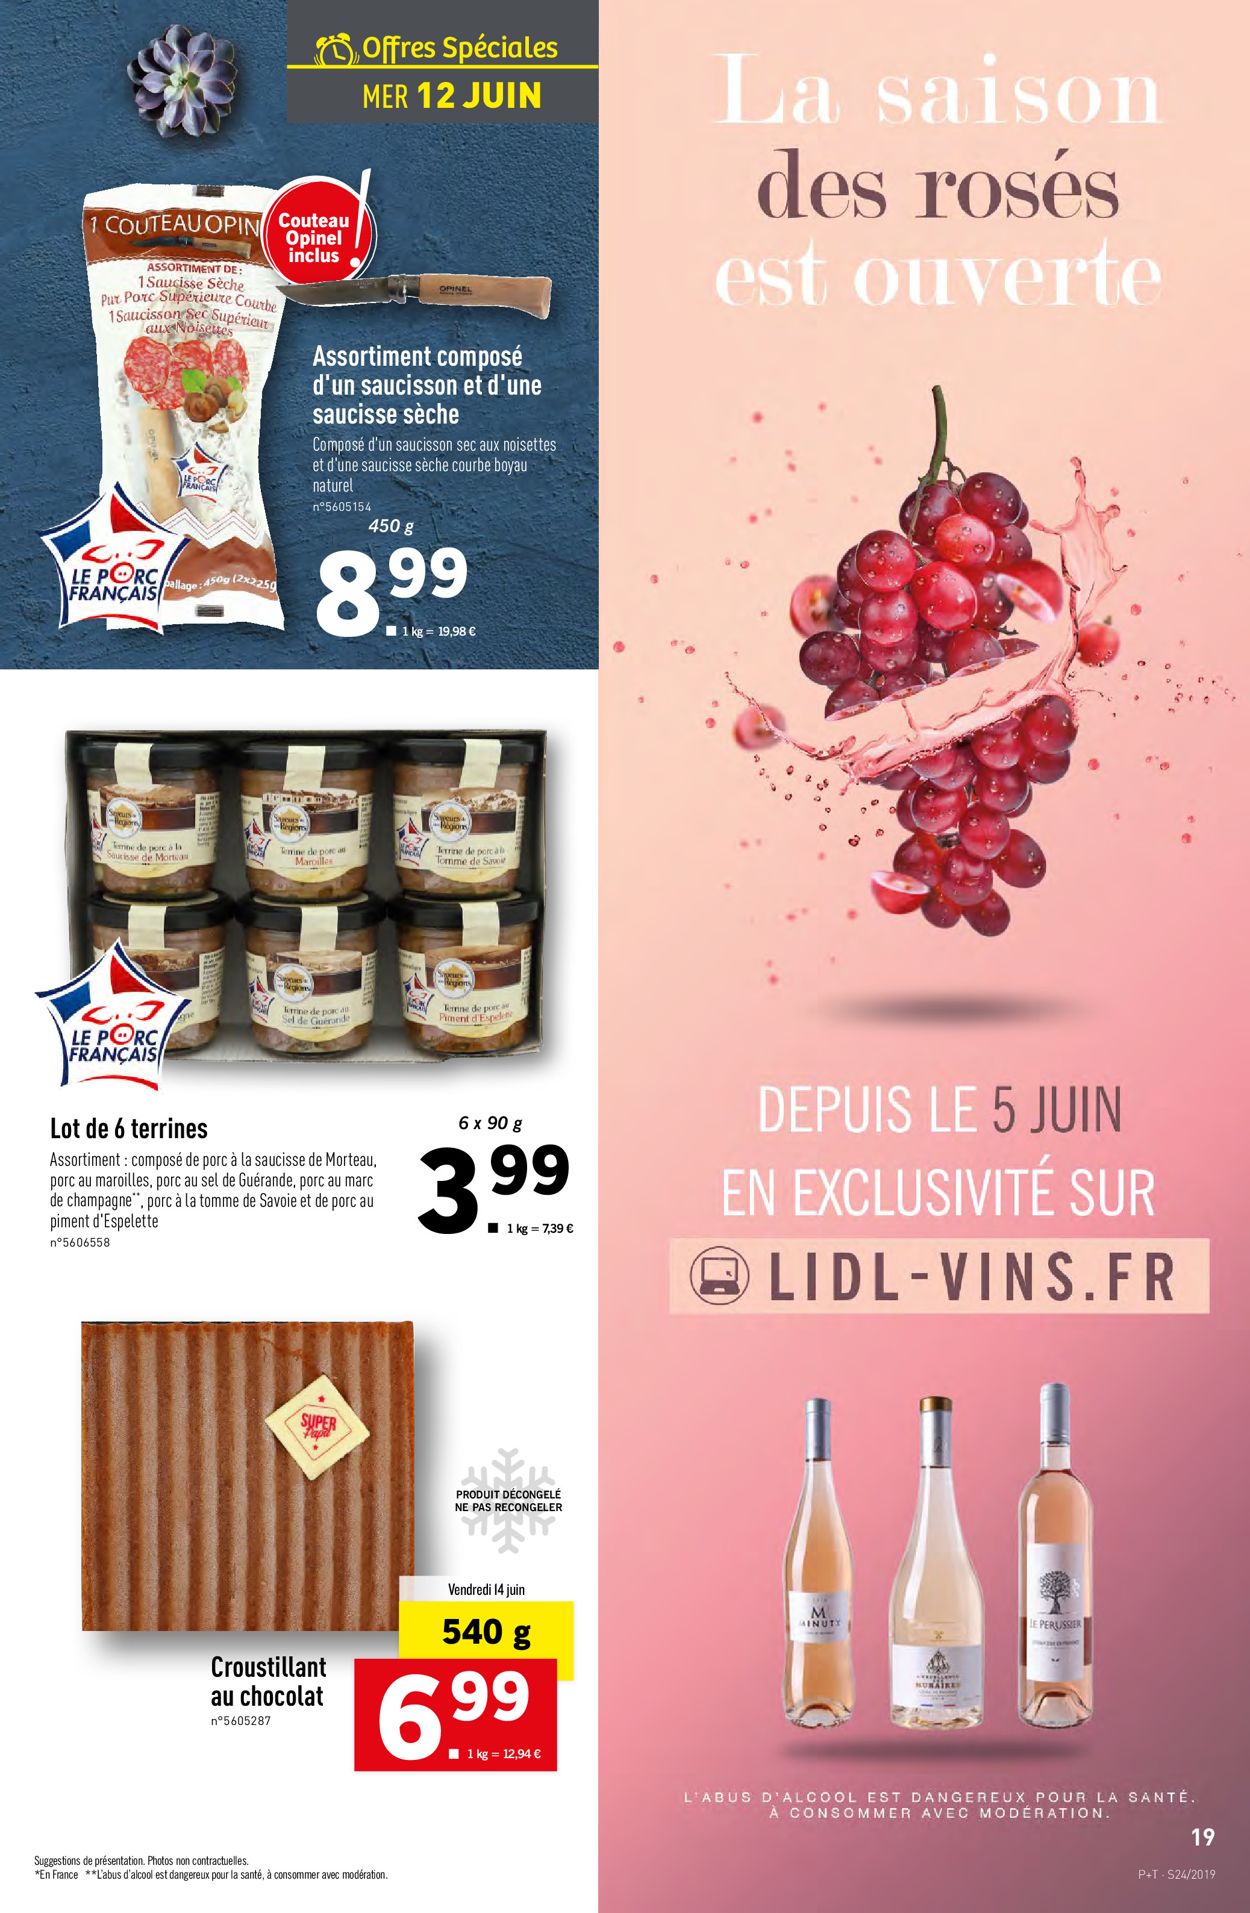 Lidl Catalogue - 12.06-18.06.2019 (Page 21)